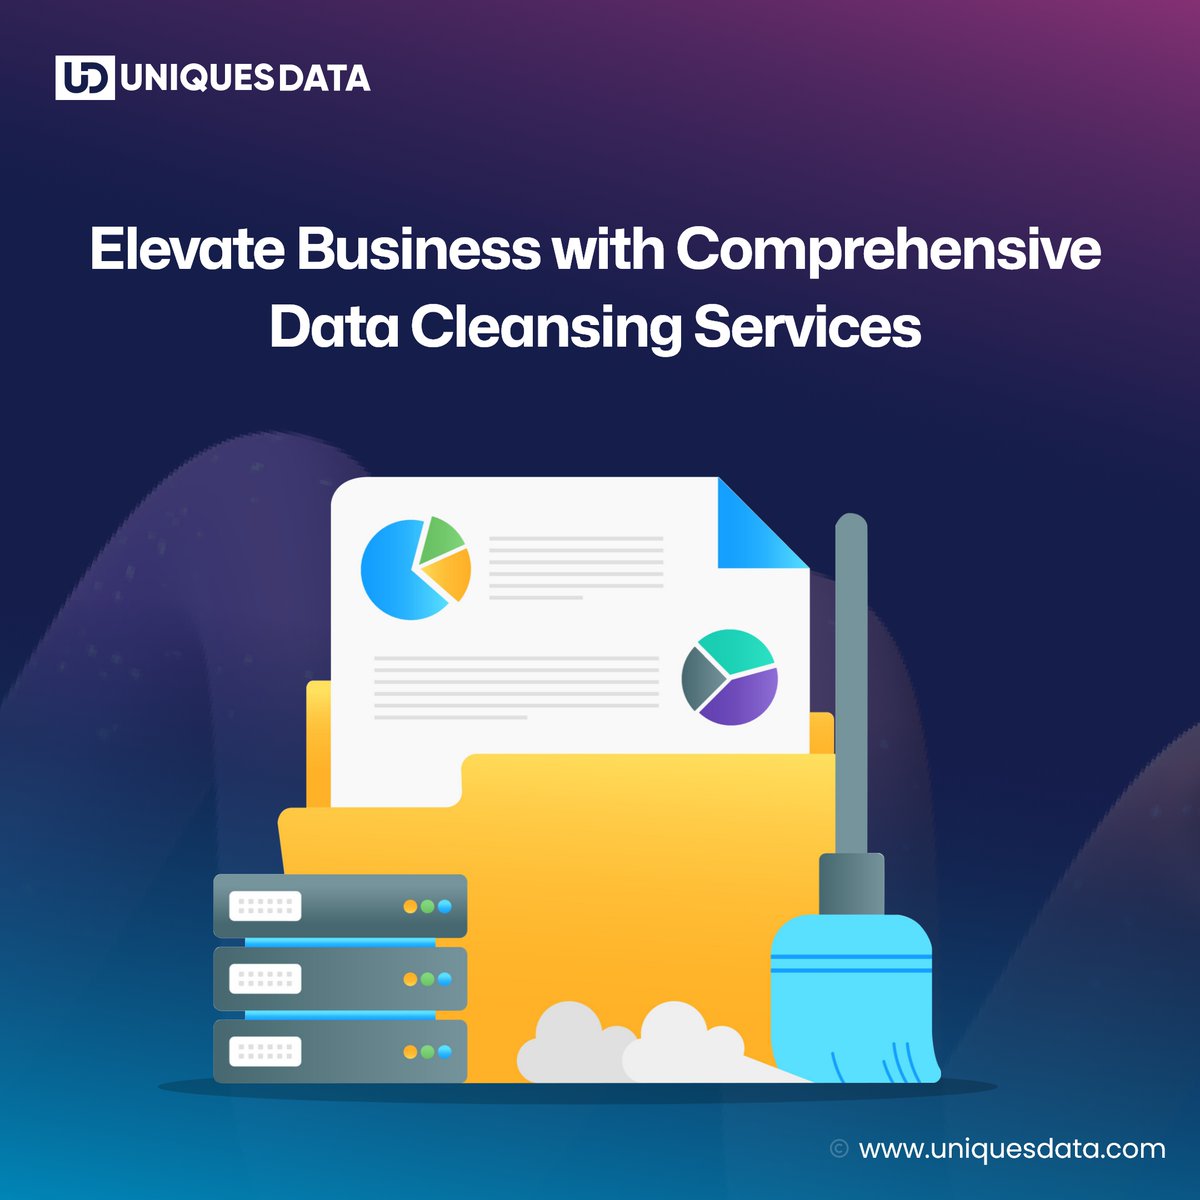 #Datacleansing services offer a variety of services and ensure the database in CRM is accurate, clean, well formatted and easy to understand to use whenever desired.

Checkout the detailed #blog.
🌐bit.ly/42O2dU6

#uniquesdata #outsourcing #crmdatacleansing